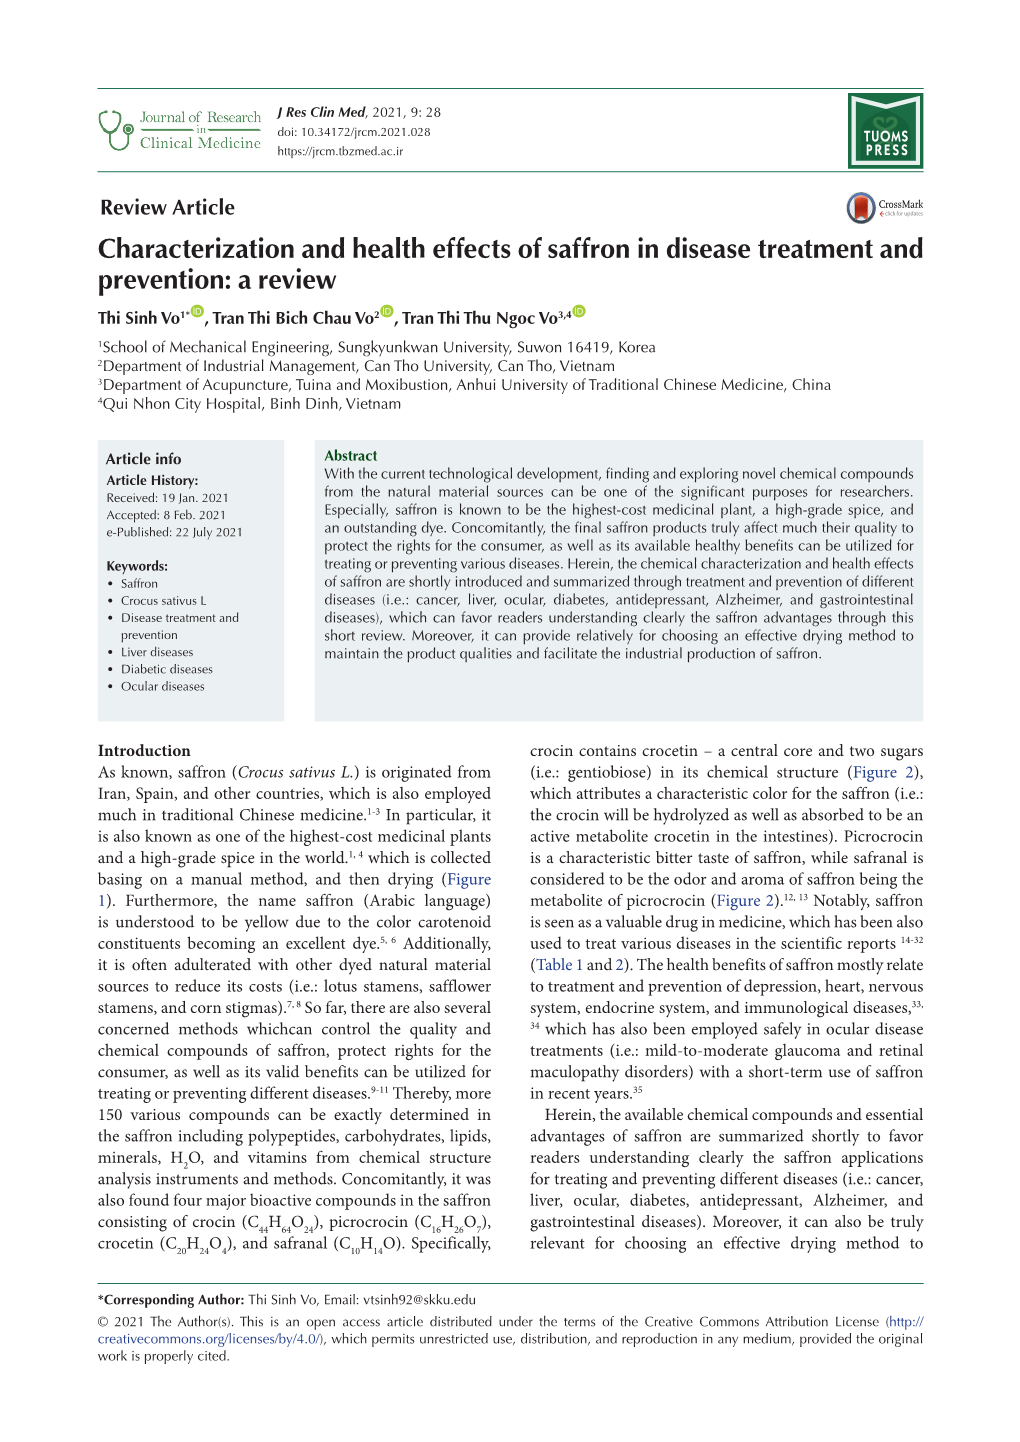 Characterization and Health Effects of Saffron in Disease Treatment And